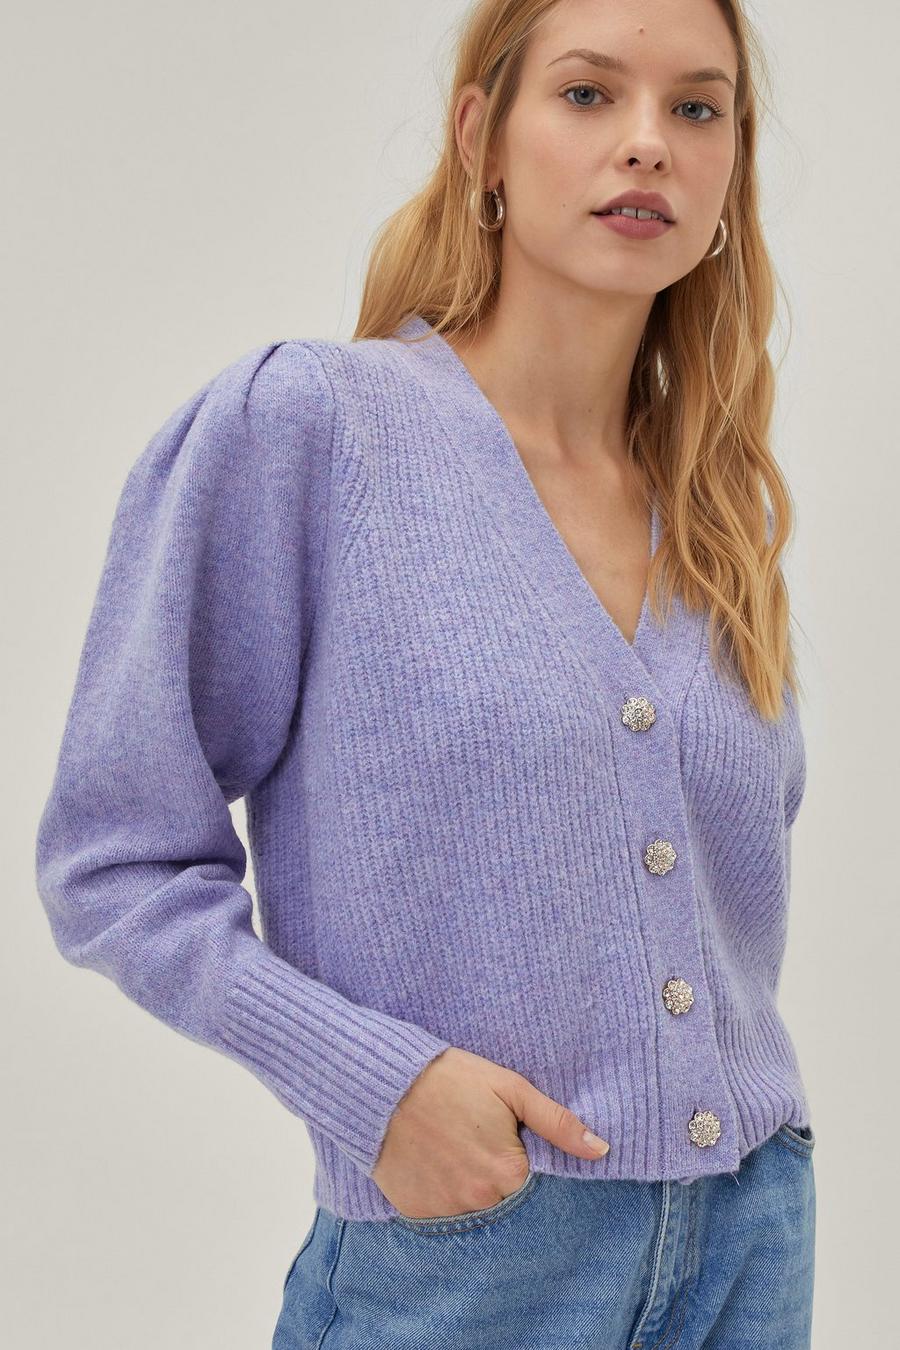 V Neck Knit Cardigan With Jewel Buttons